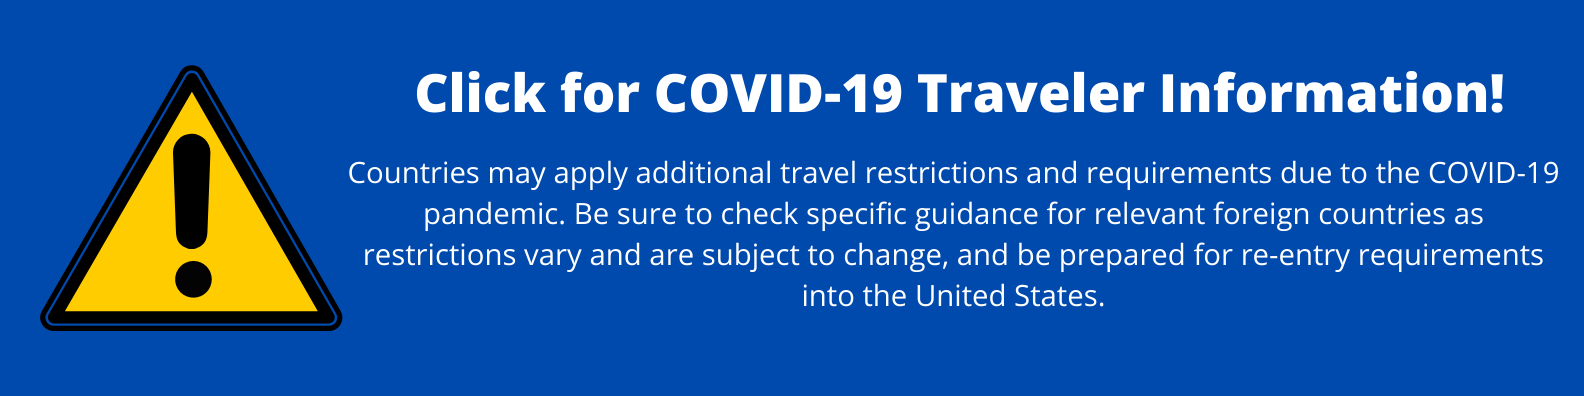 COVID19 travel information banner image